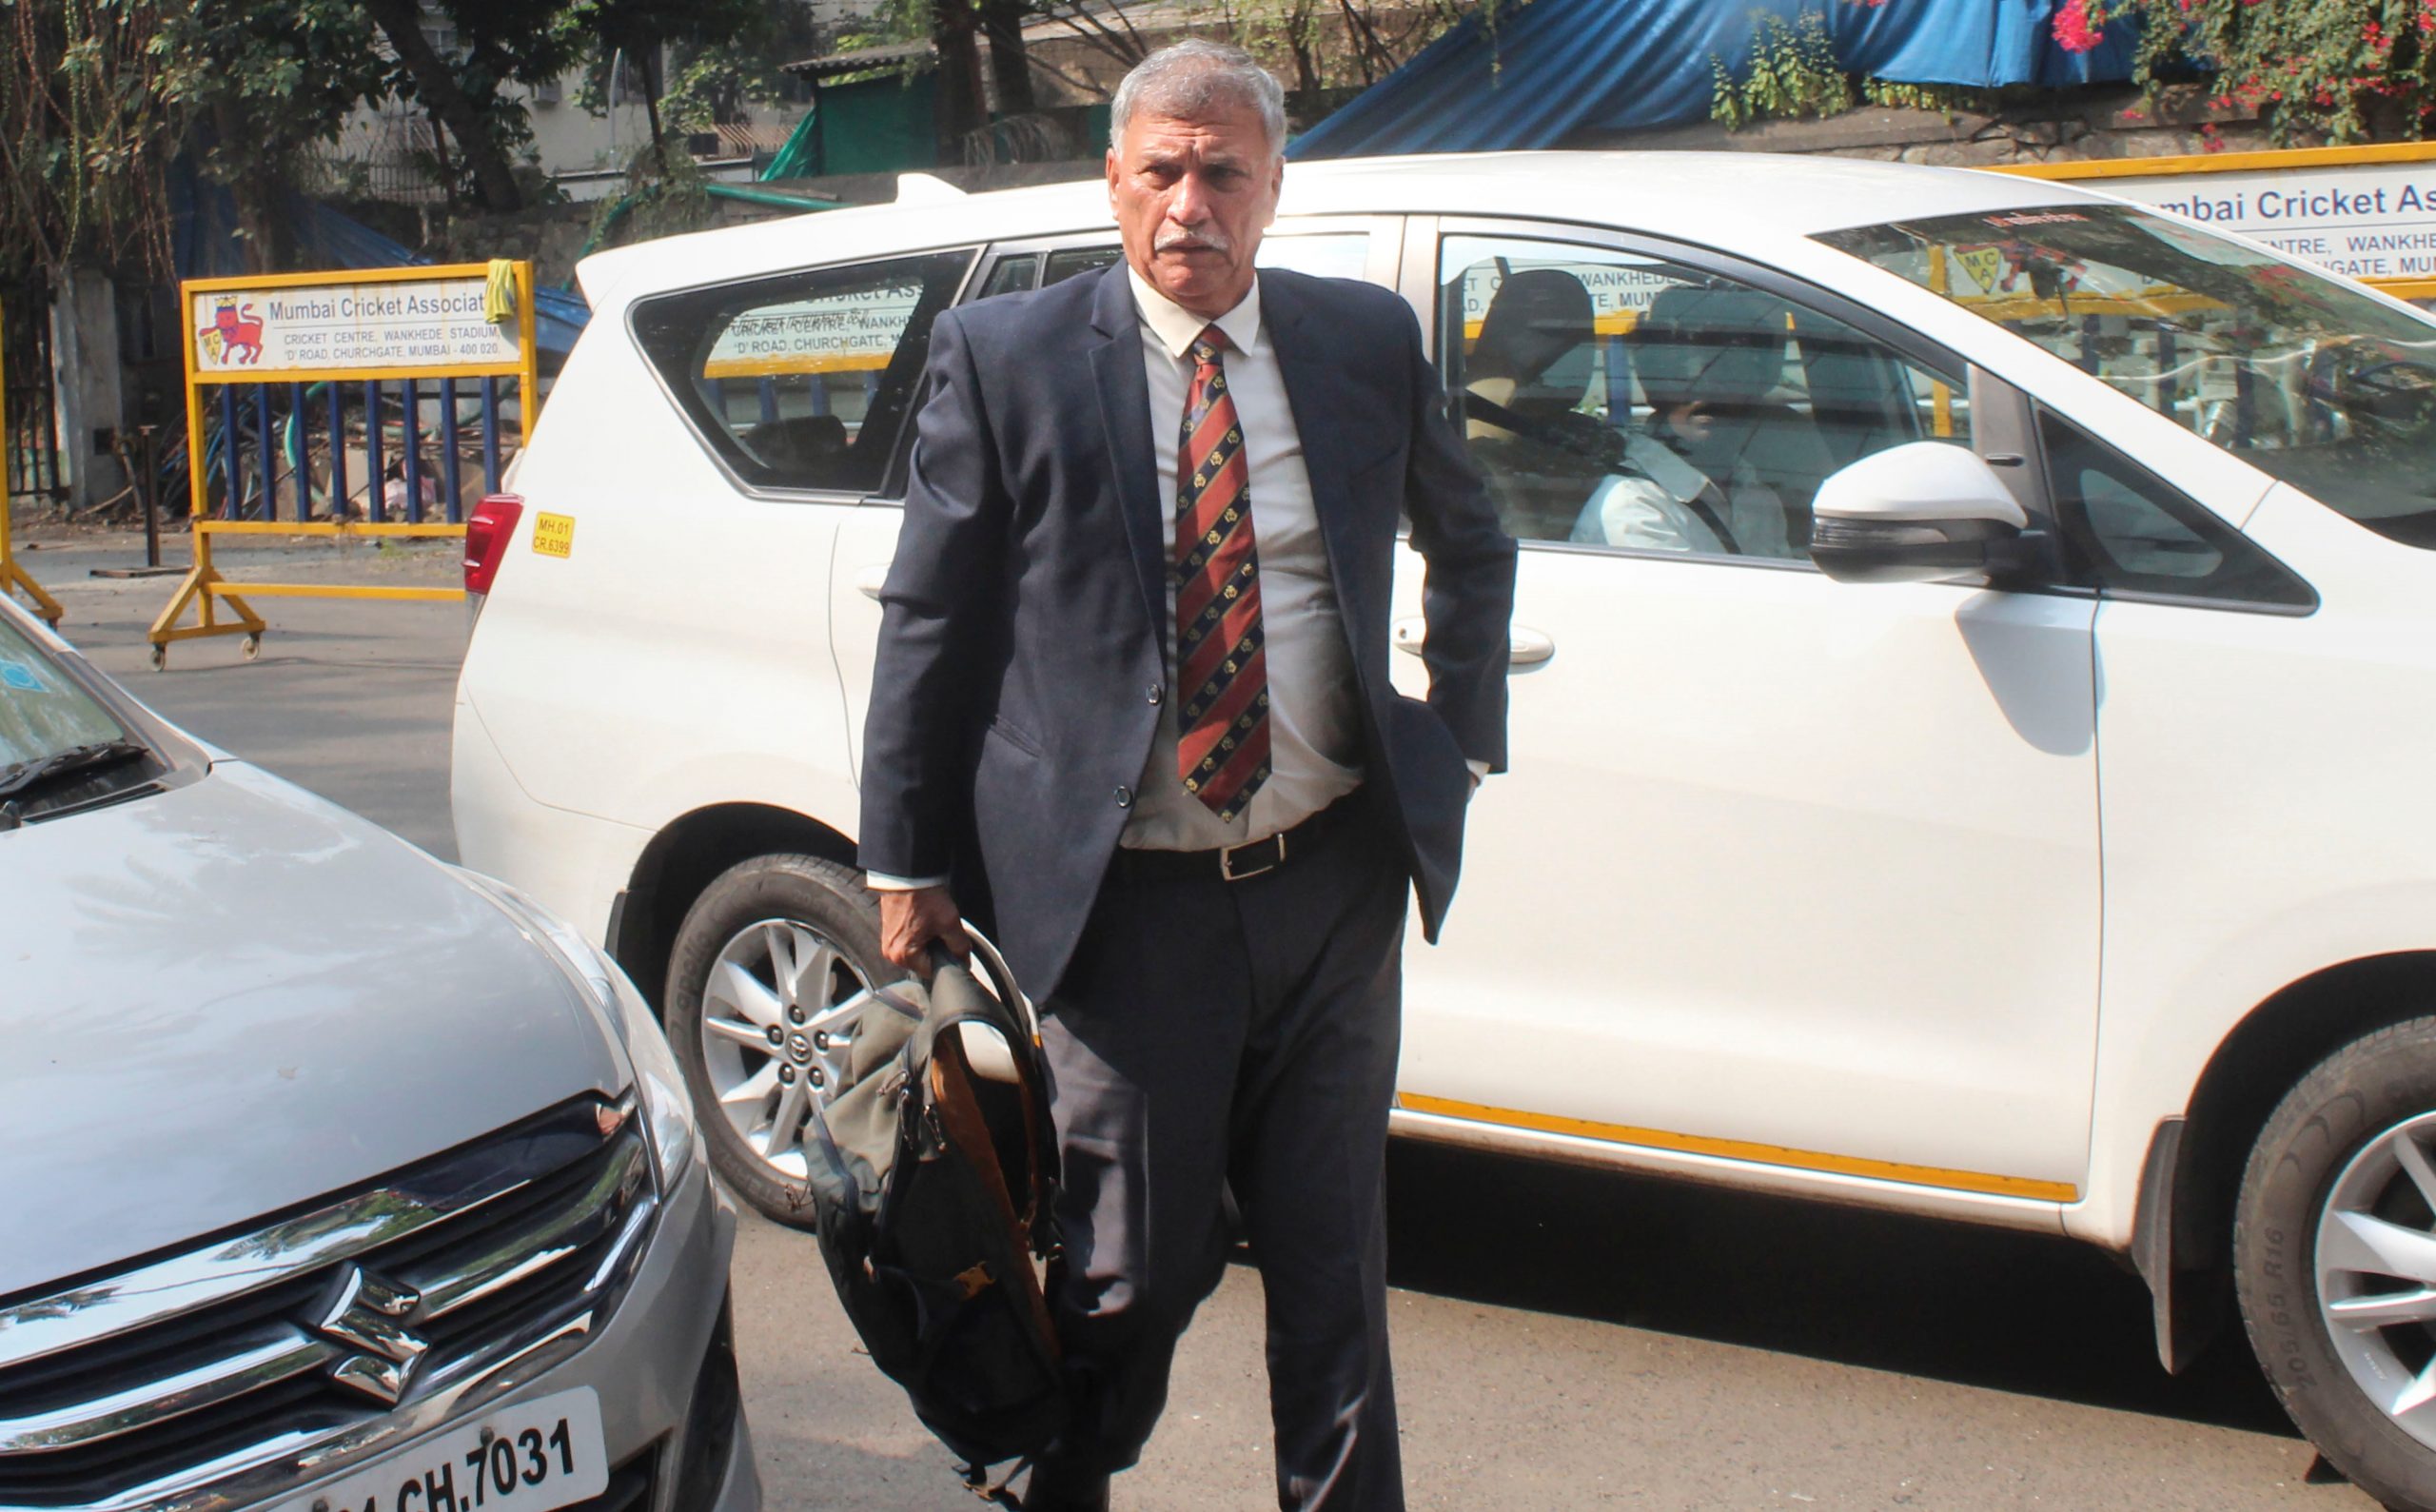 Roger Binny appointed as BCCI President, to succeed Sourav Ganguly